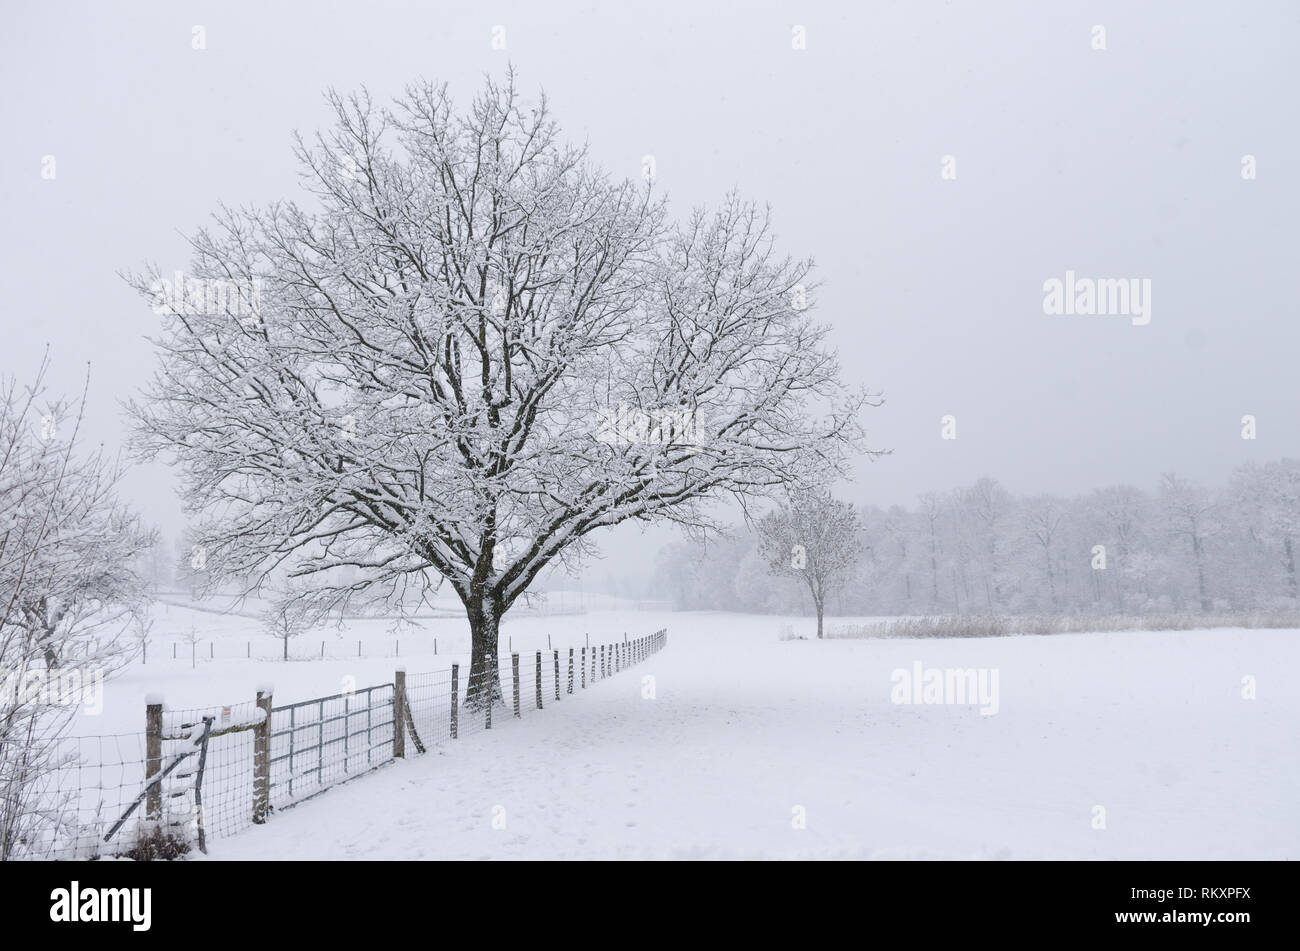 Winter snowy scene with fence and solitary tree and forest in the background Stock Photo